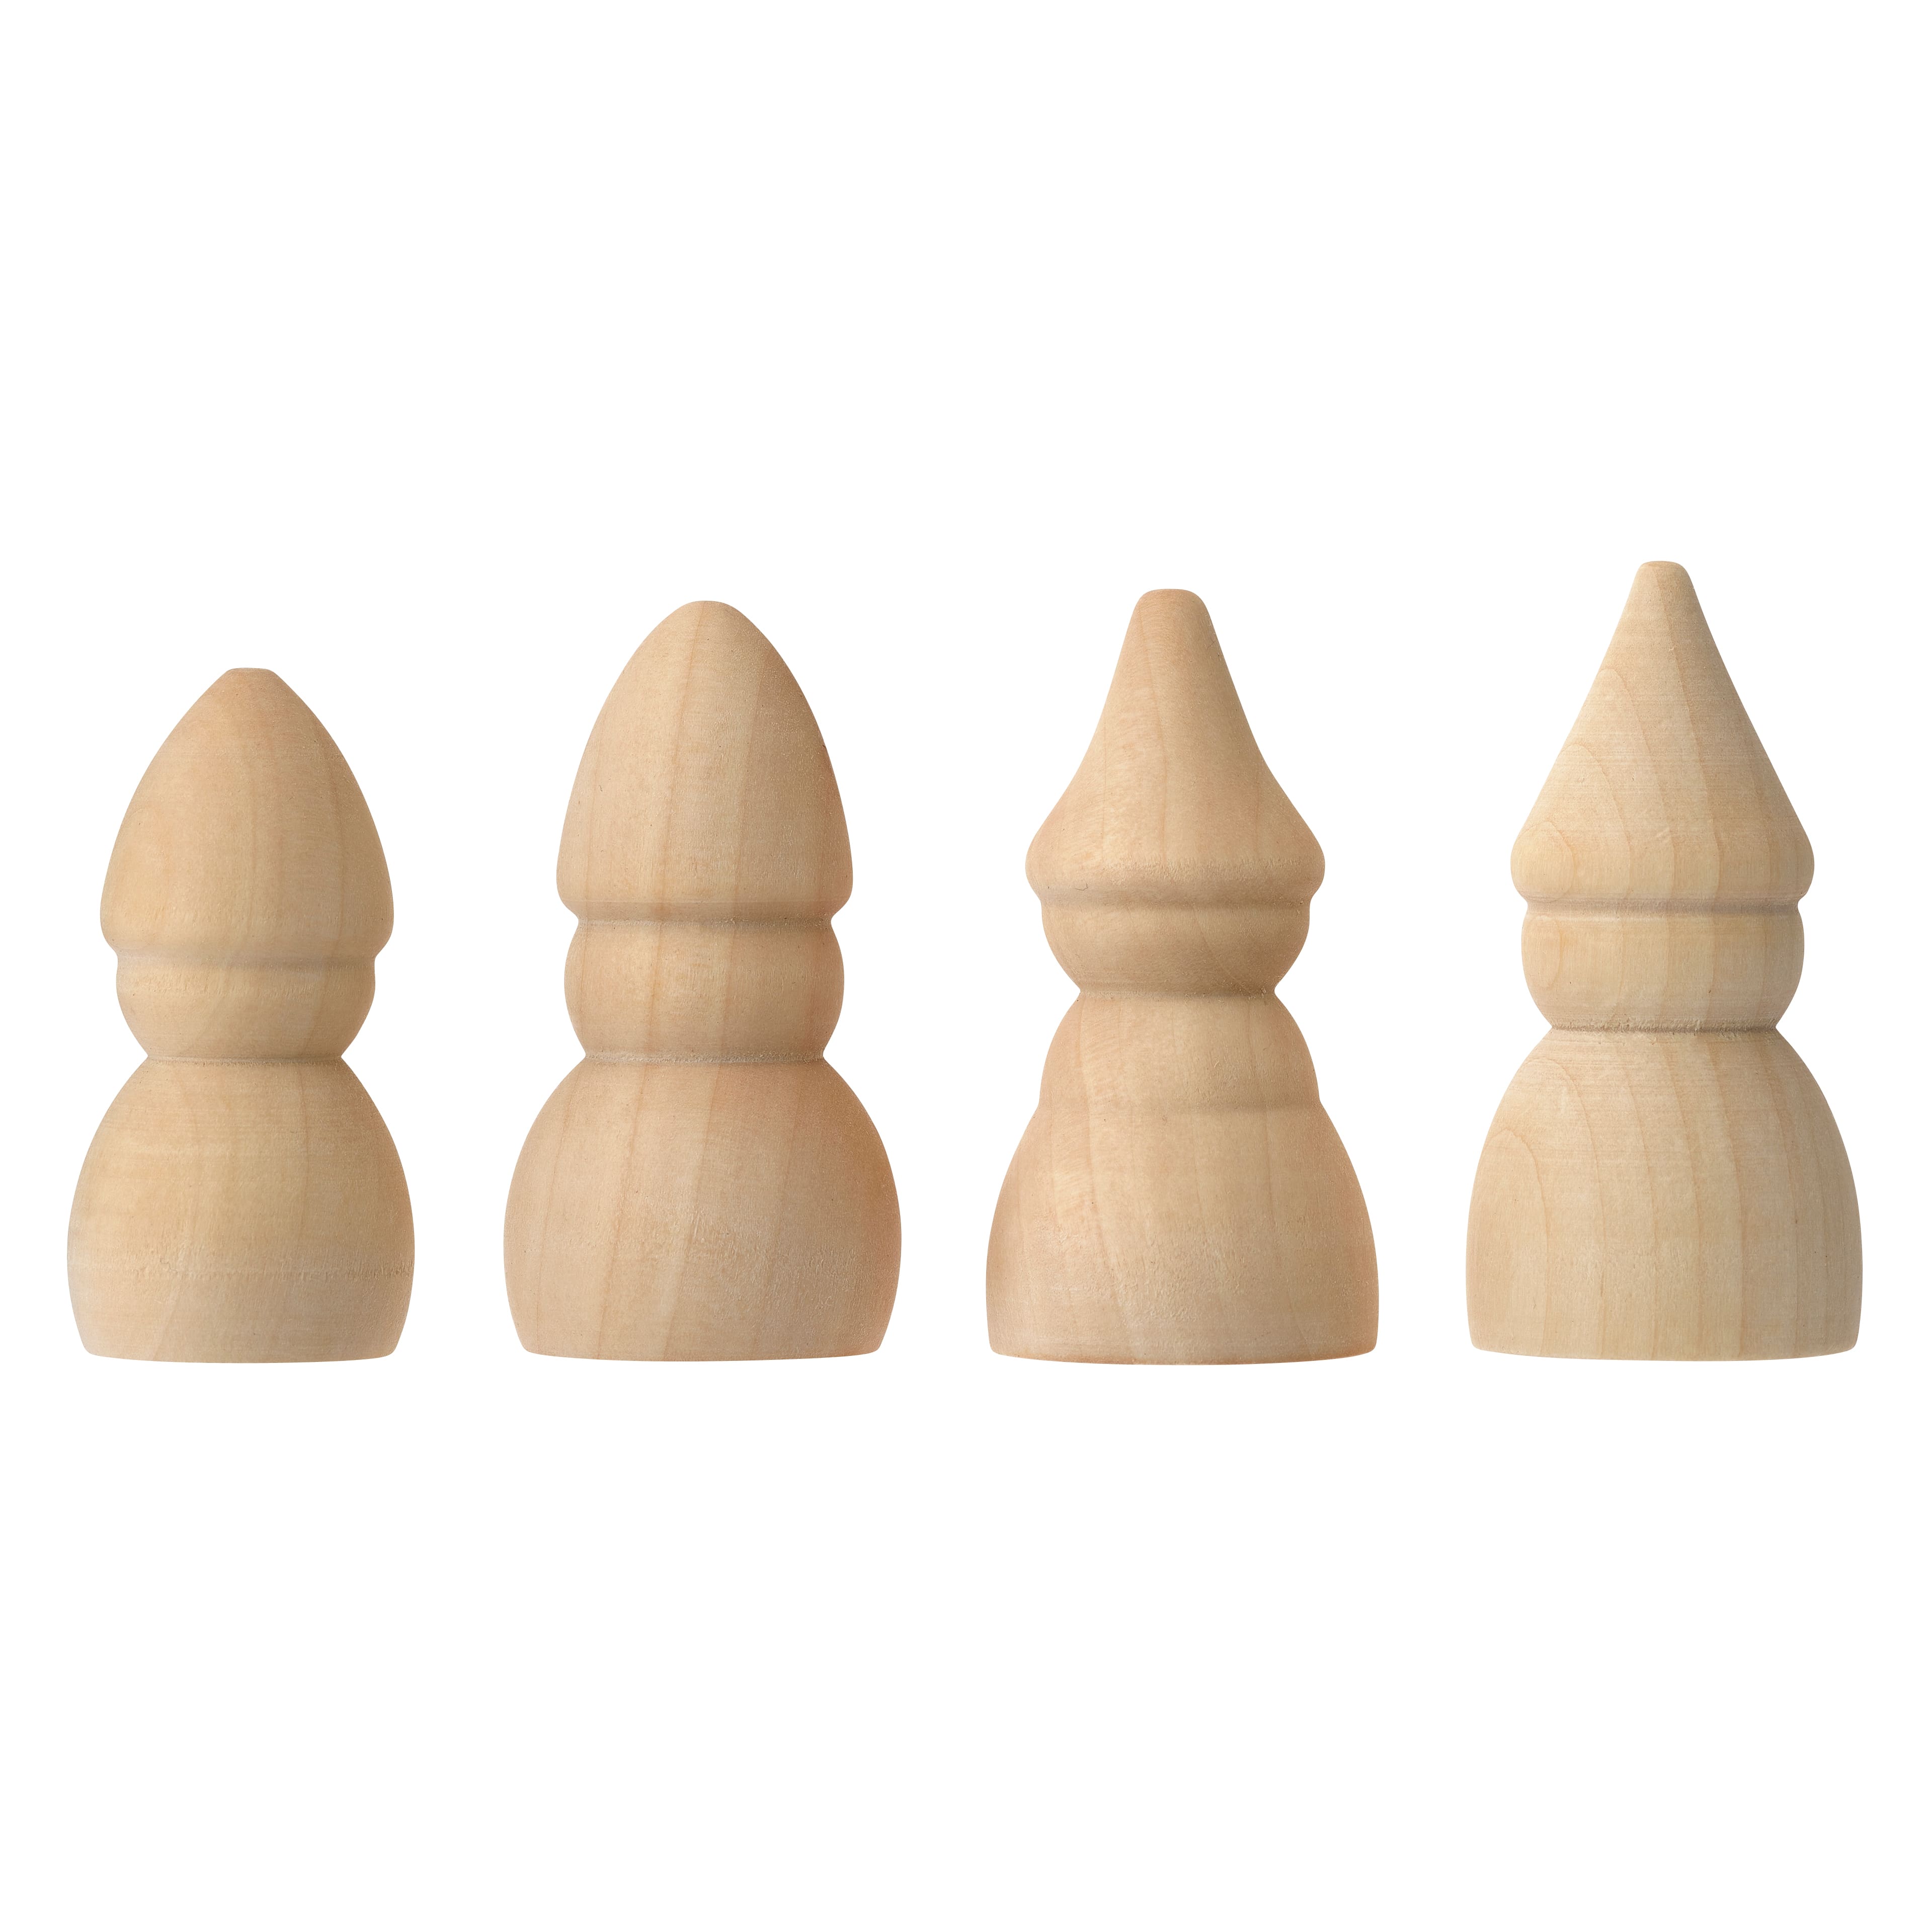 12 Packs: 4 ct. (48 total) Mixed Gnome Peg Figures by Creatology&#x2122;